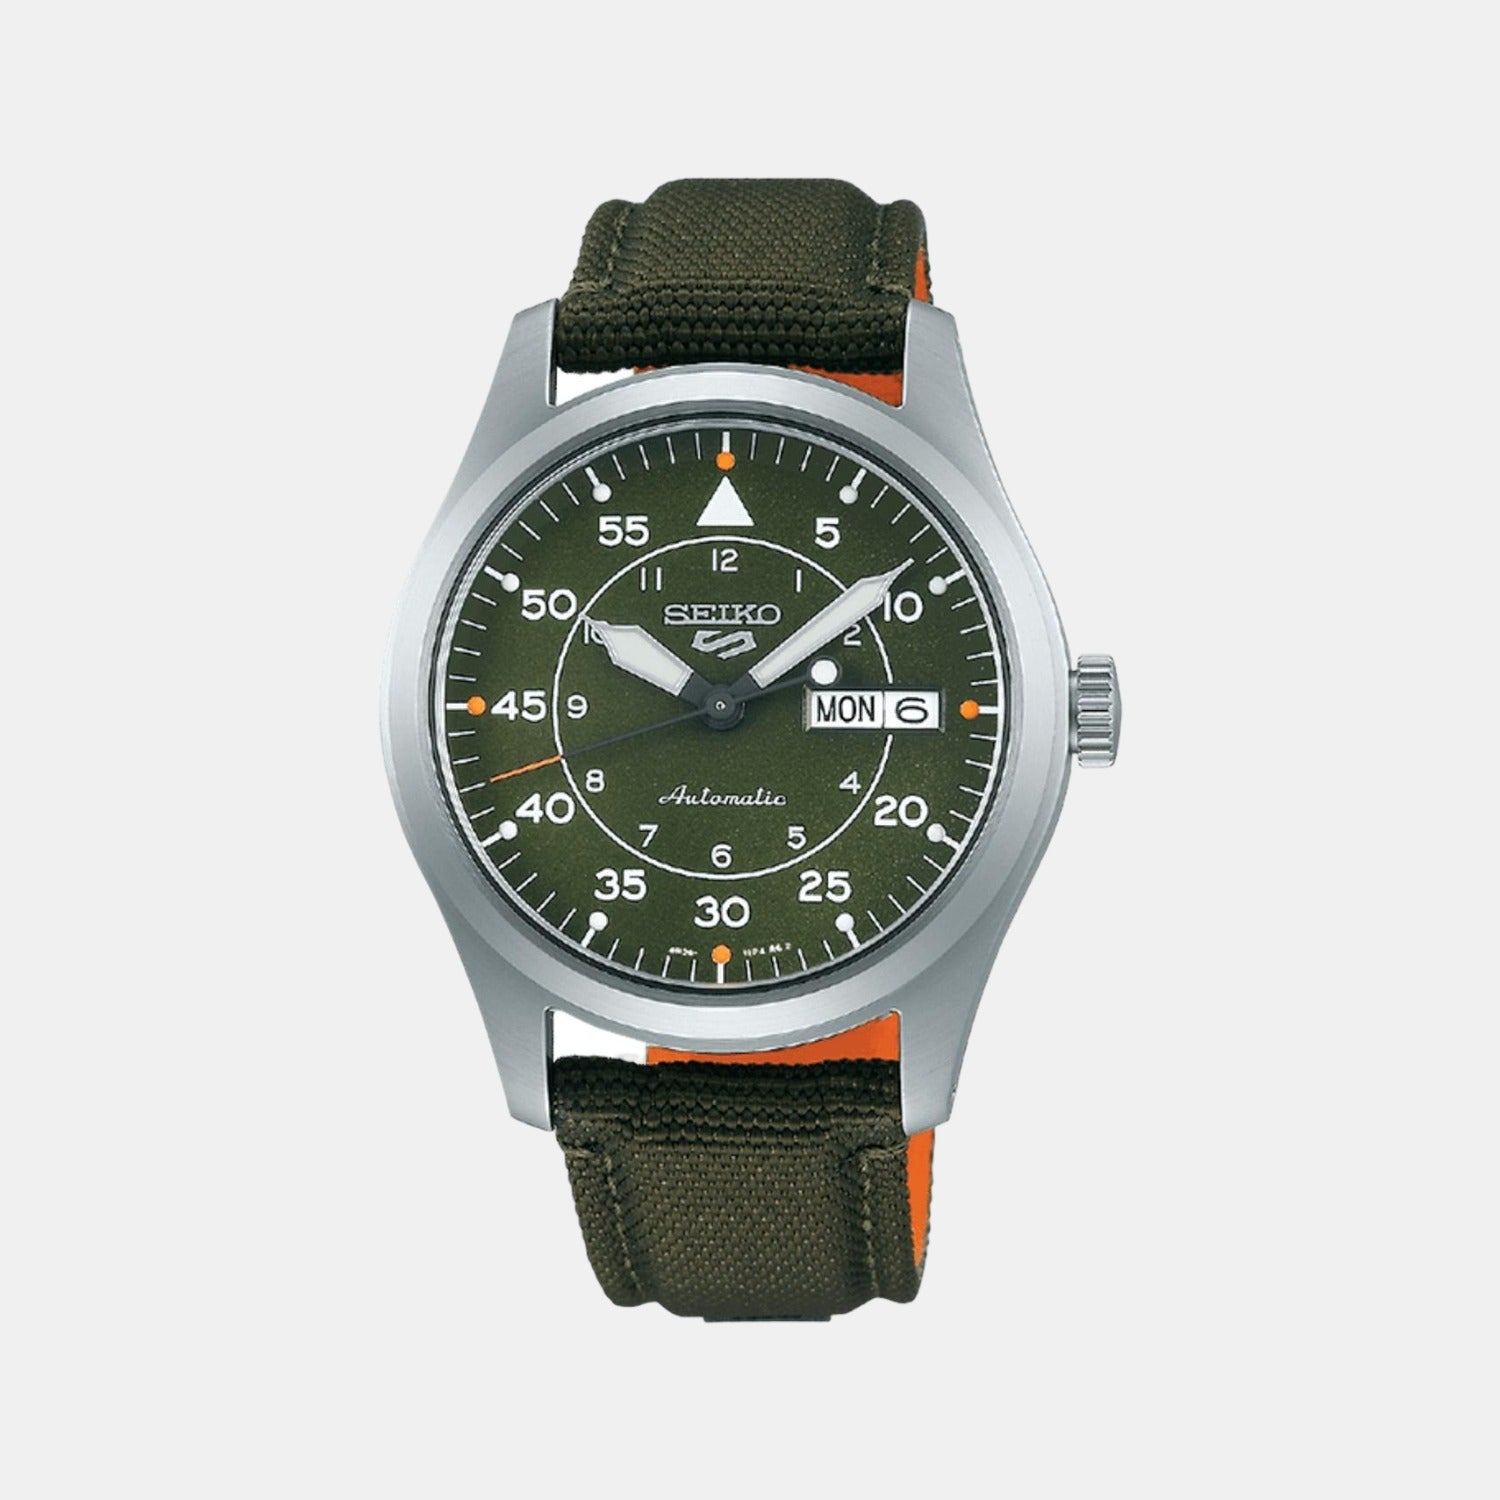 Male Green Analog Leather Automatic Watch SRPH29K1